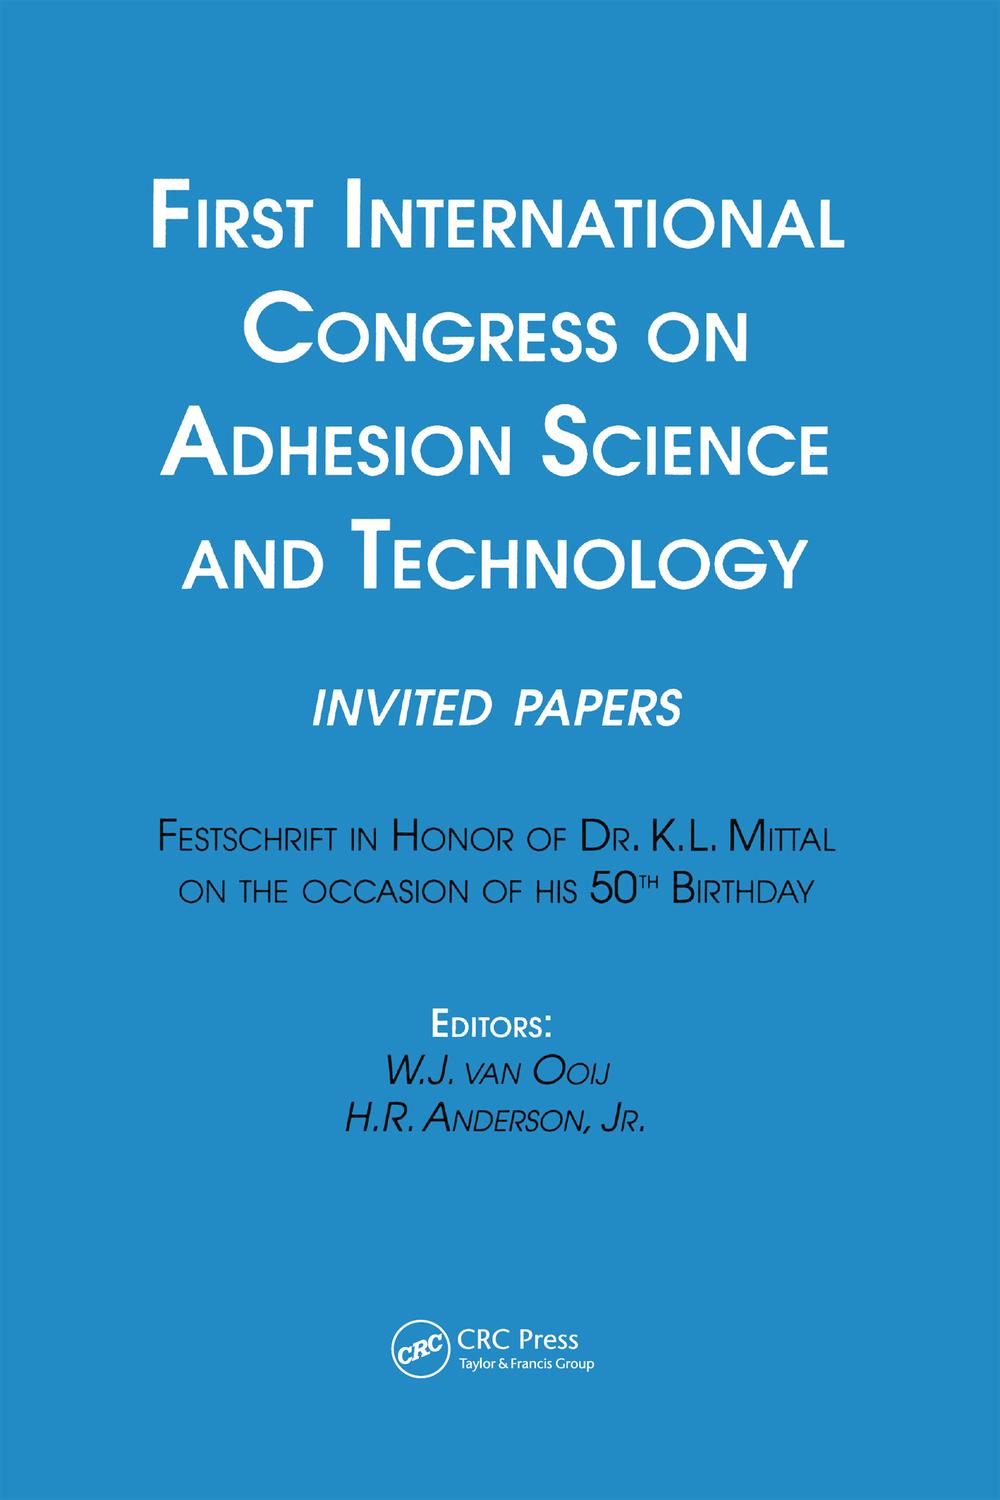 First International Congress on Adhesion Science and Technology---invited papers - W.J. van Ooij, H.R. Anderson Jnr